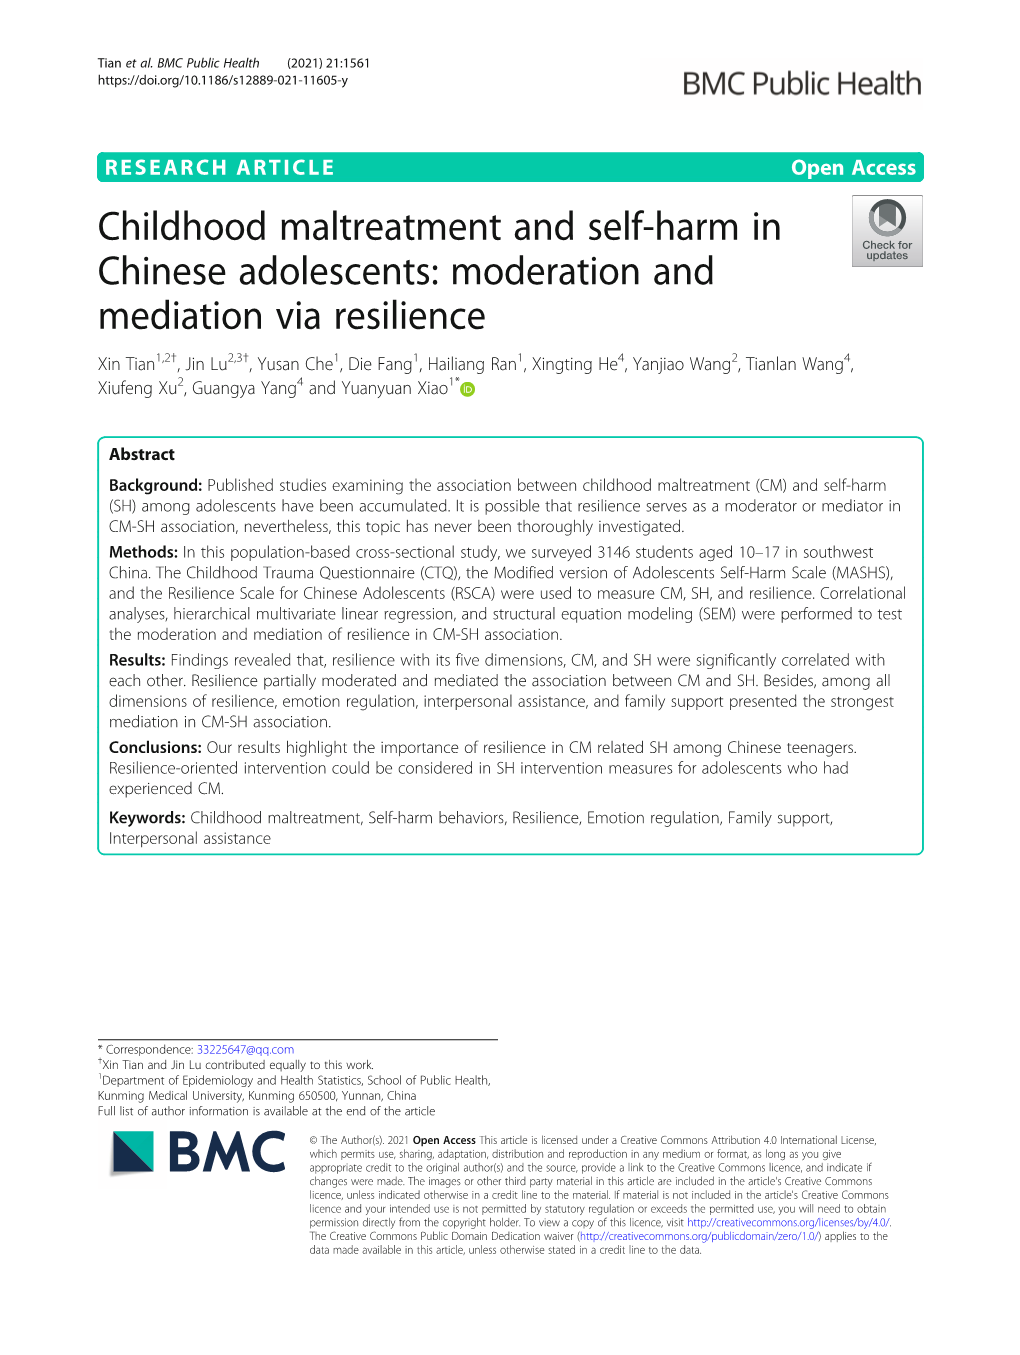 Childhood Maltreatment and Self-Harm in Chinese Adolescents